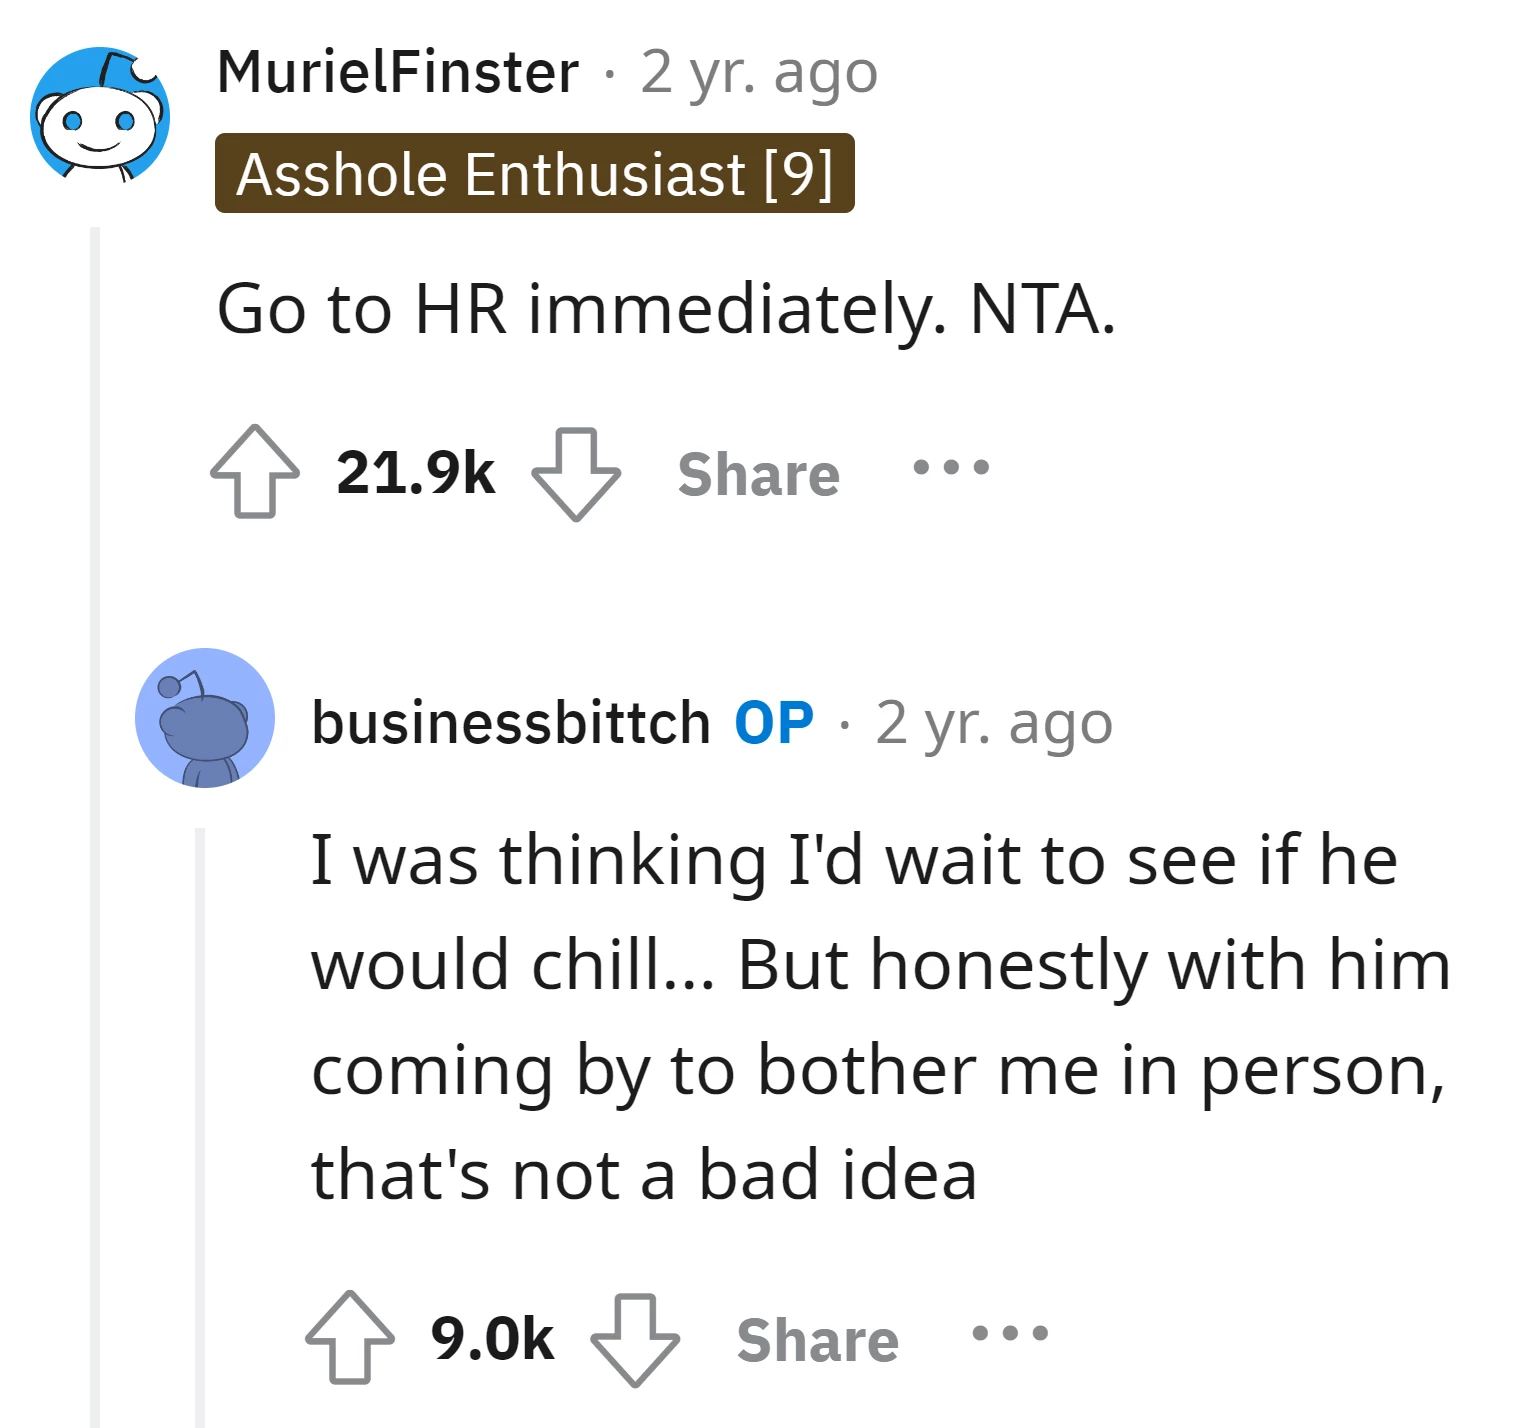 The HR needs to here this